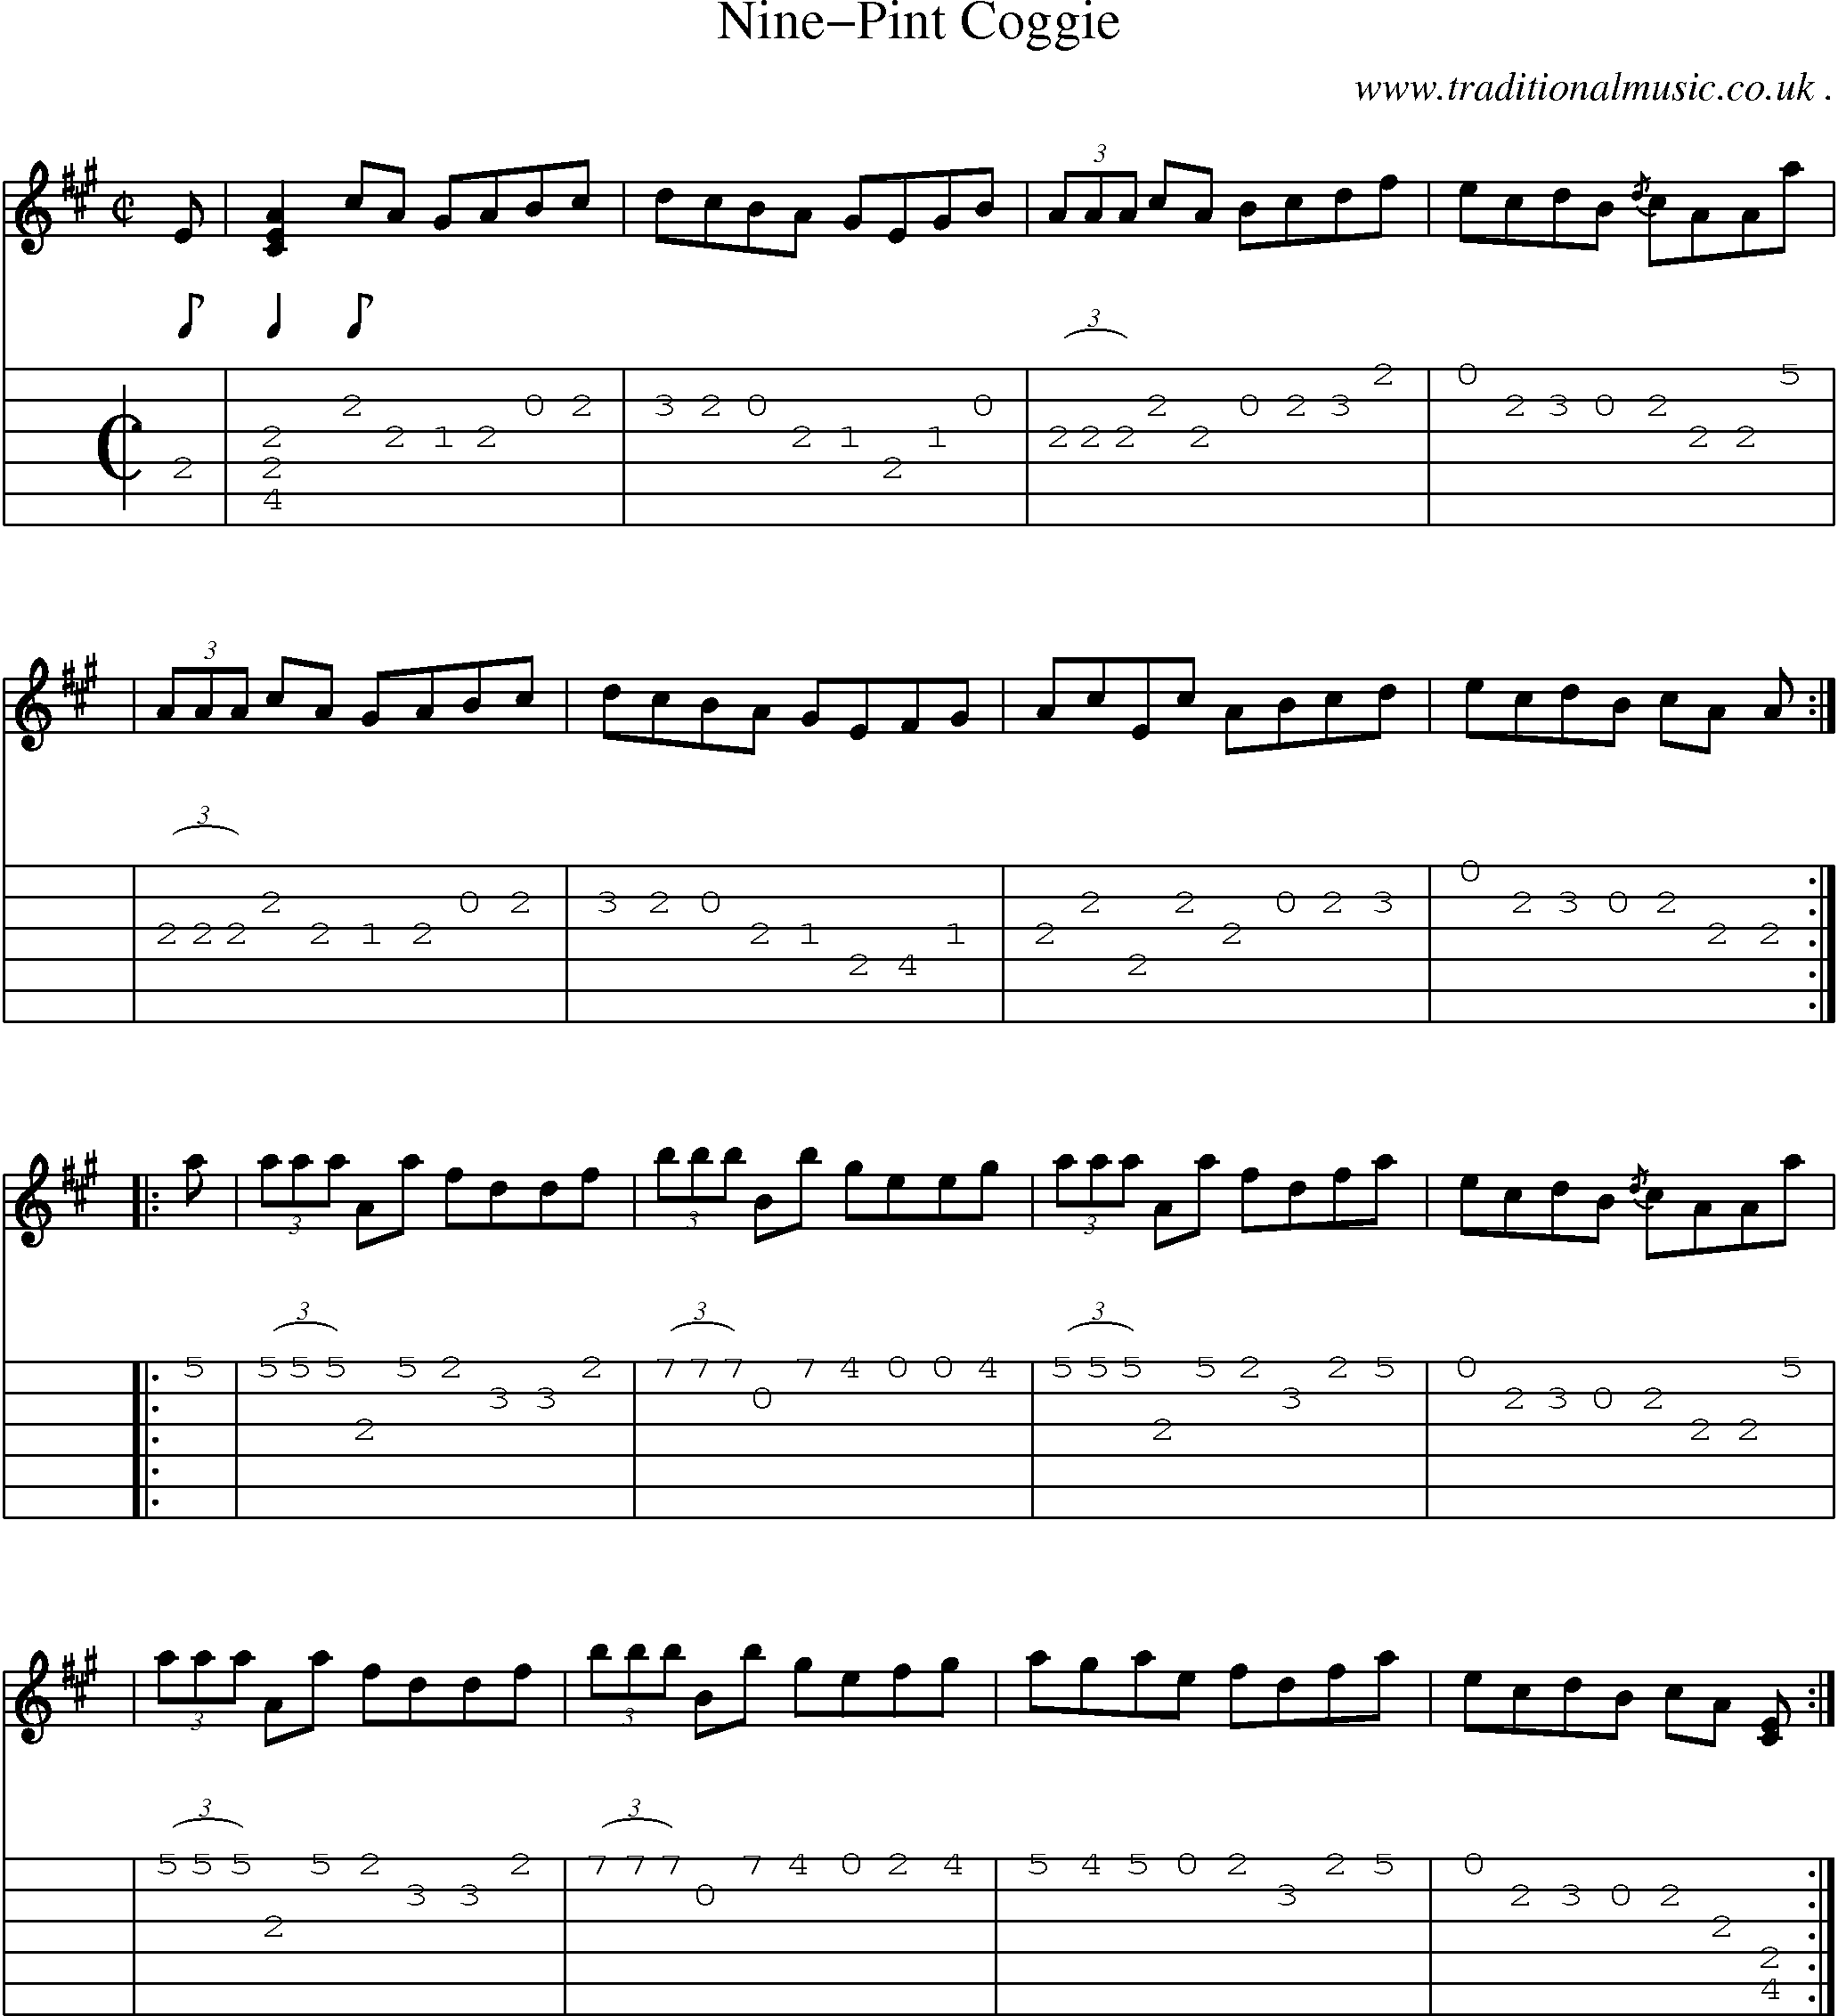 Sheet-music  score, Chords and Guitar Tabs for Nine-pint Coggie